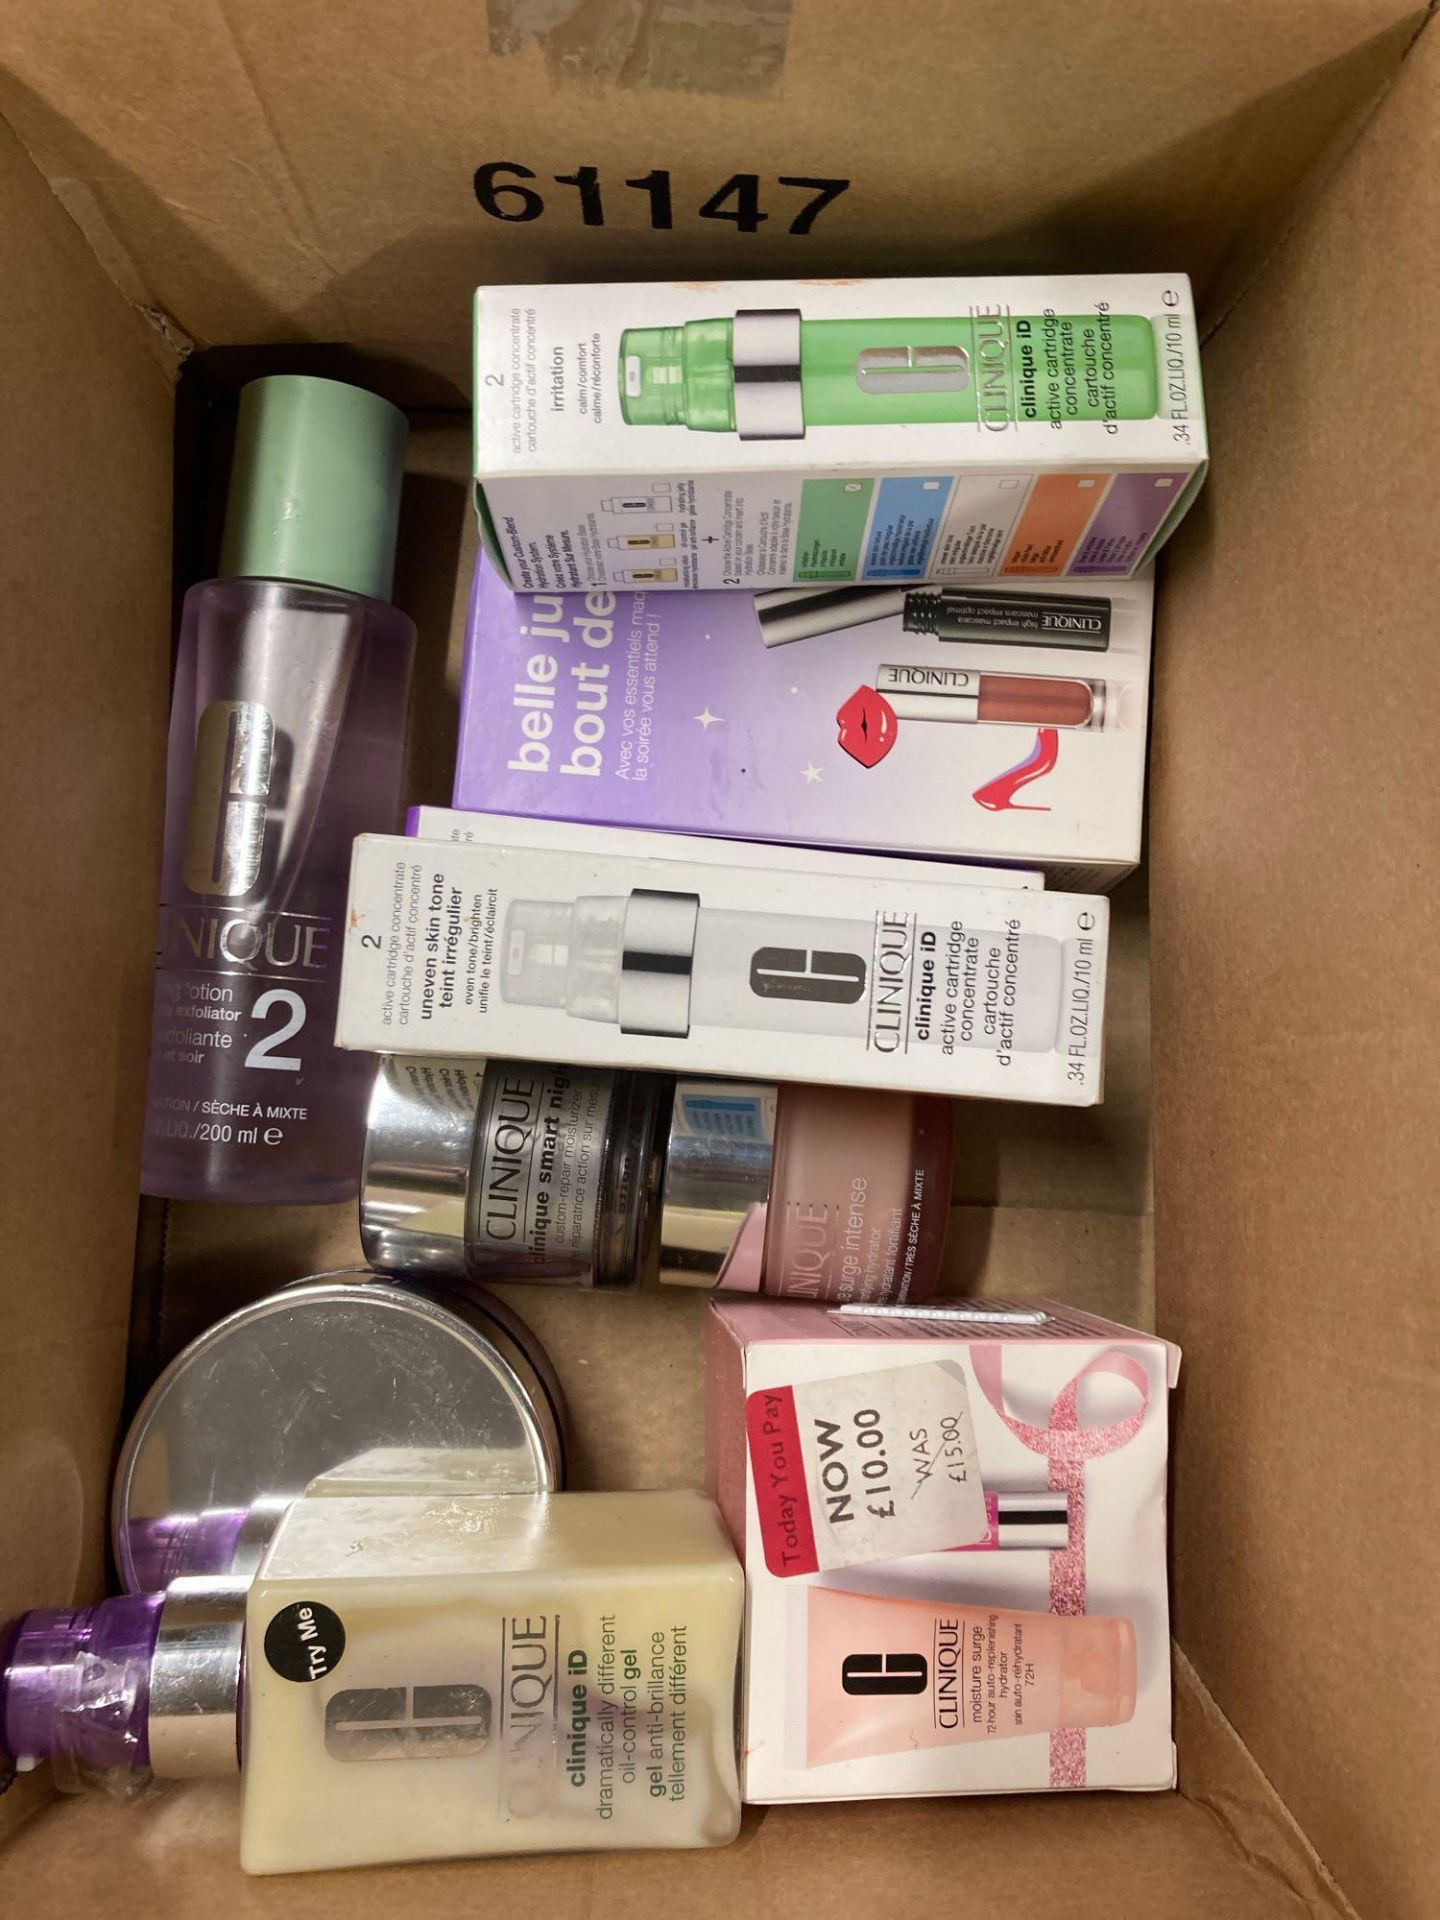 (Jb) RRP £200 Lot To Contain 10 Testers Of Assorted Premium Body Lotions, Shower Gels, Hand